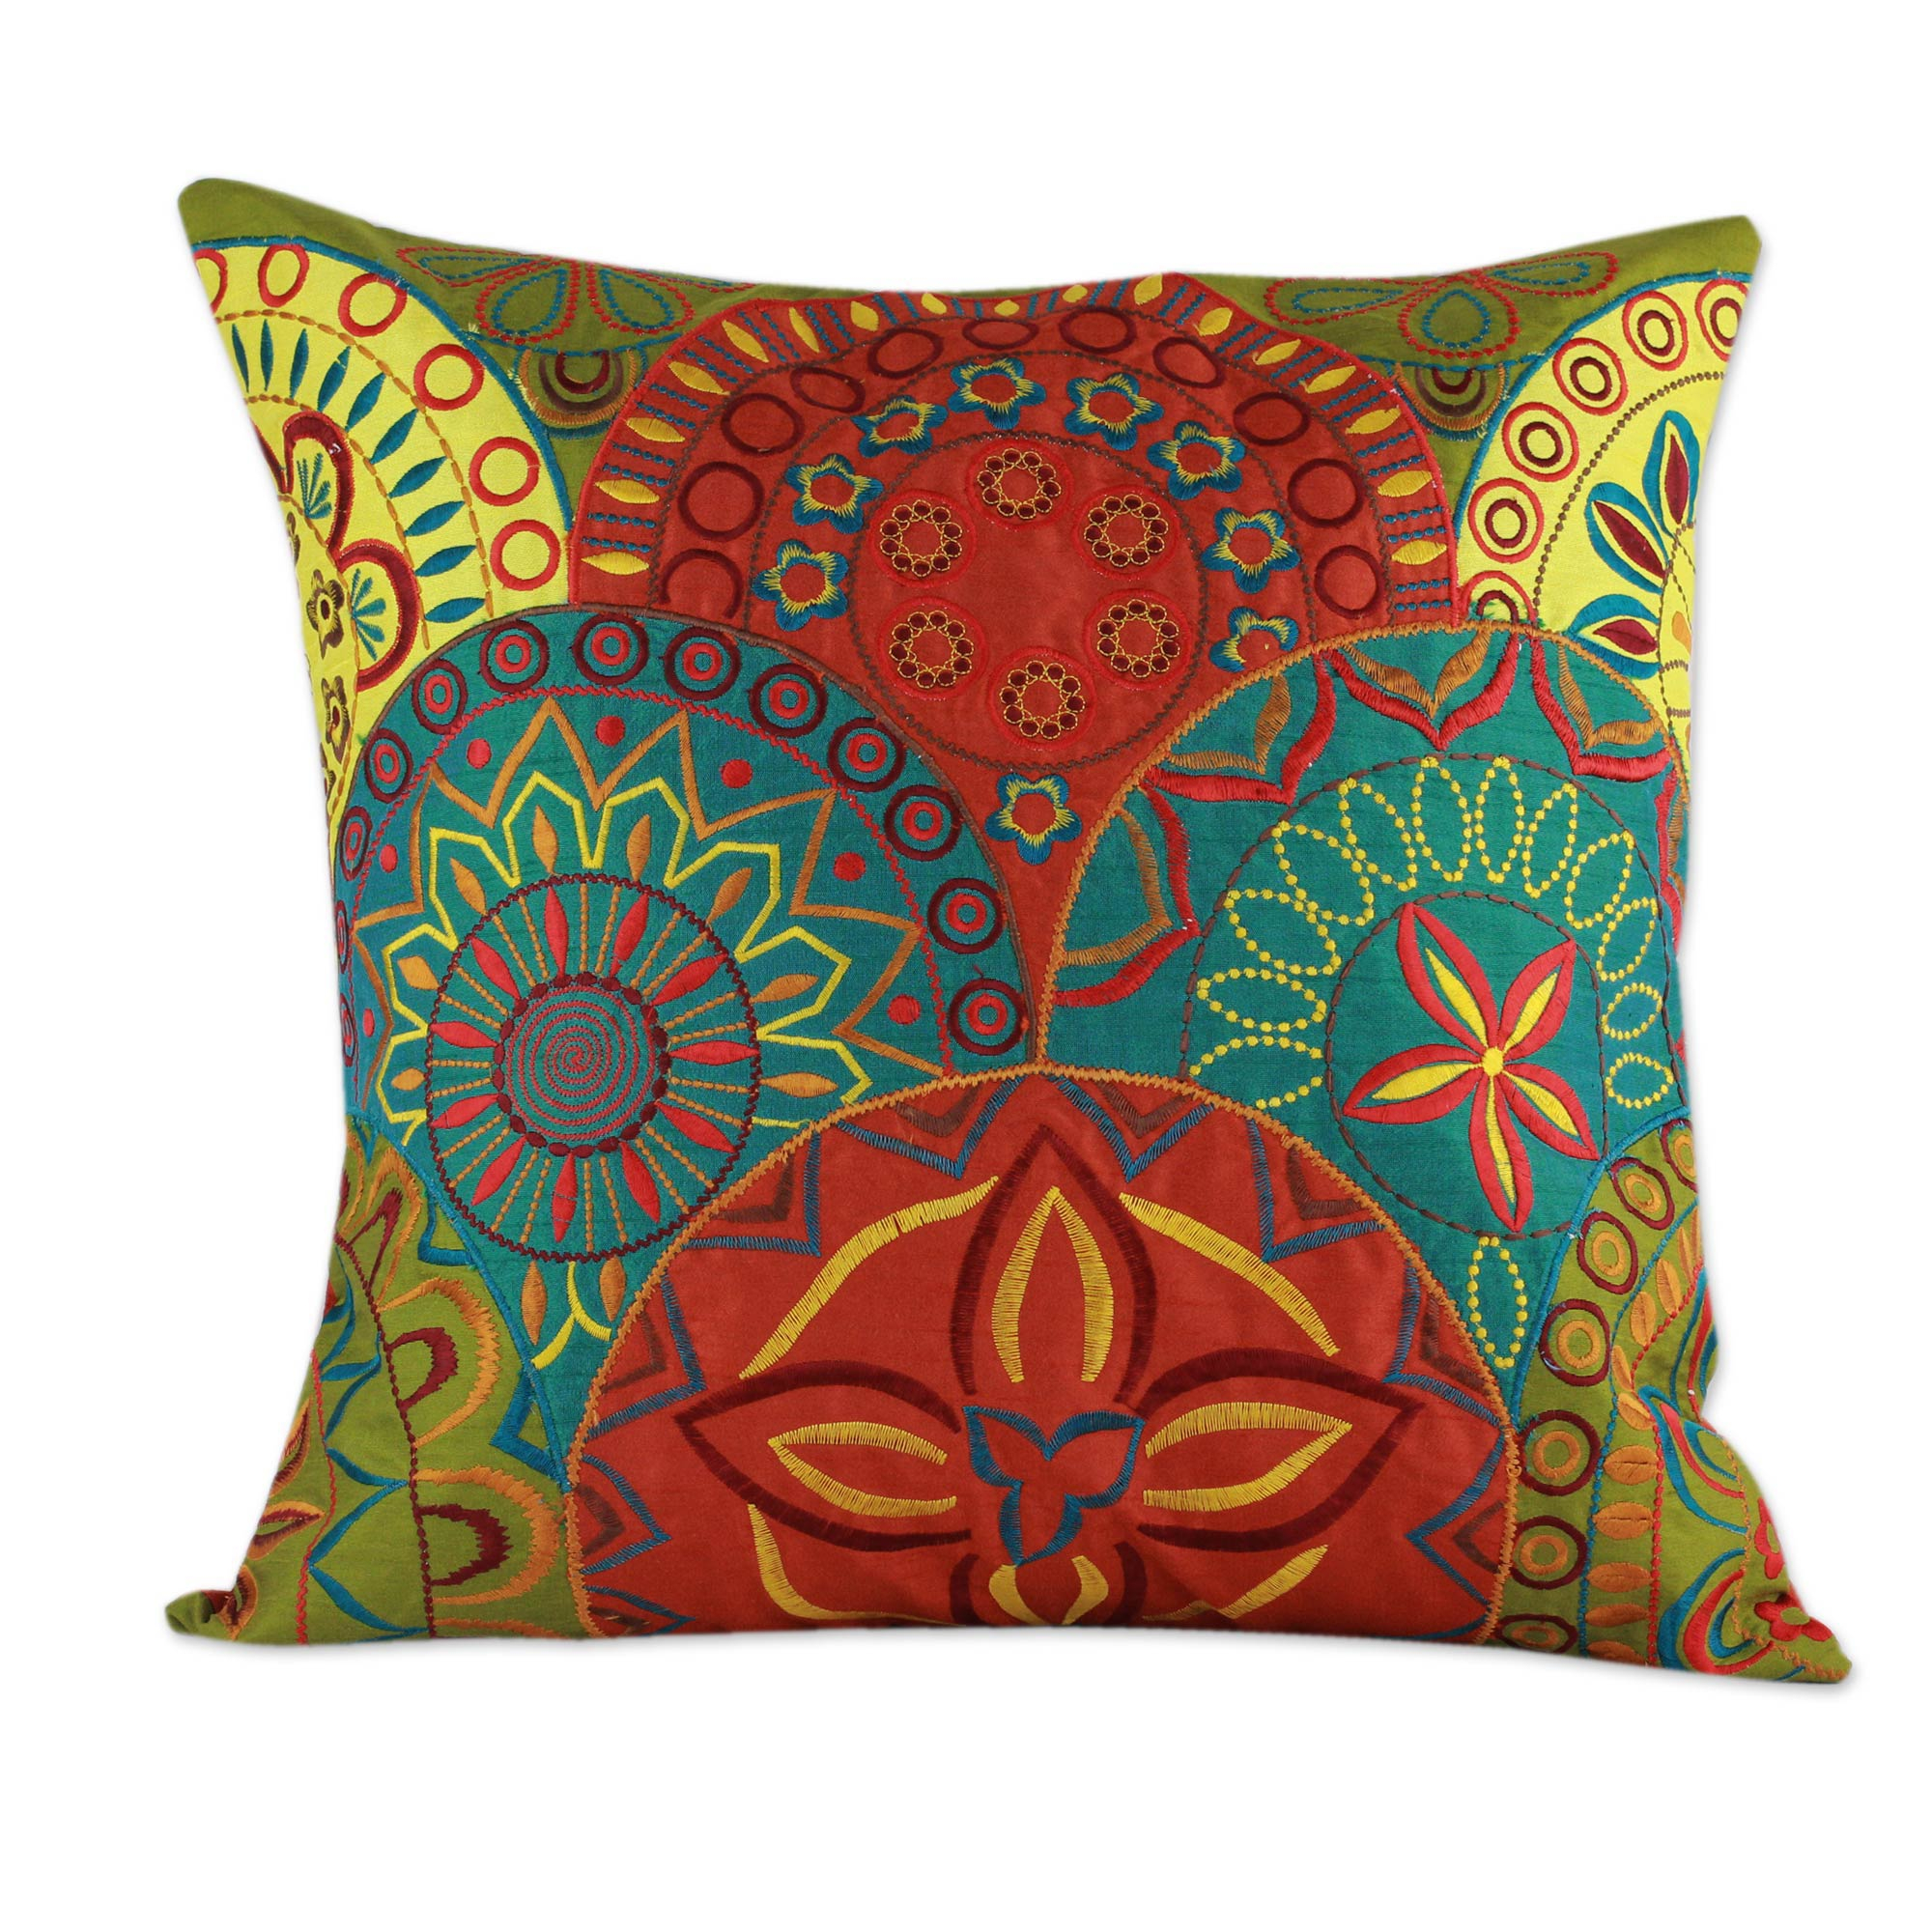 2 Orange and Teal Embroidered Applique Cushion Covers - Glorious | NOVICA